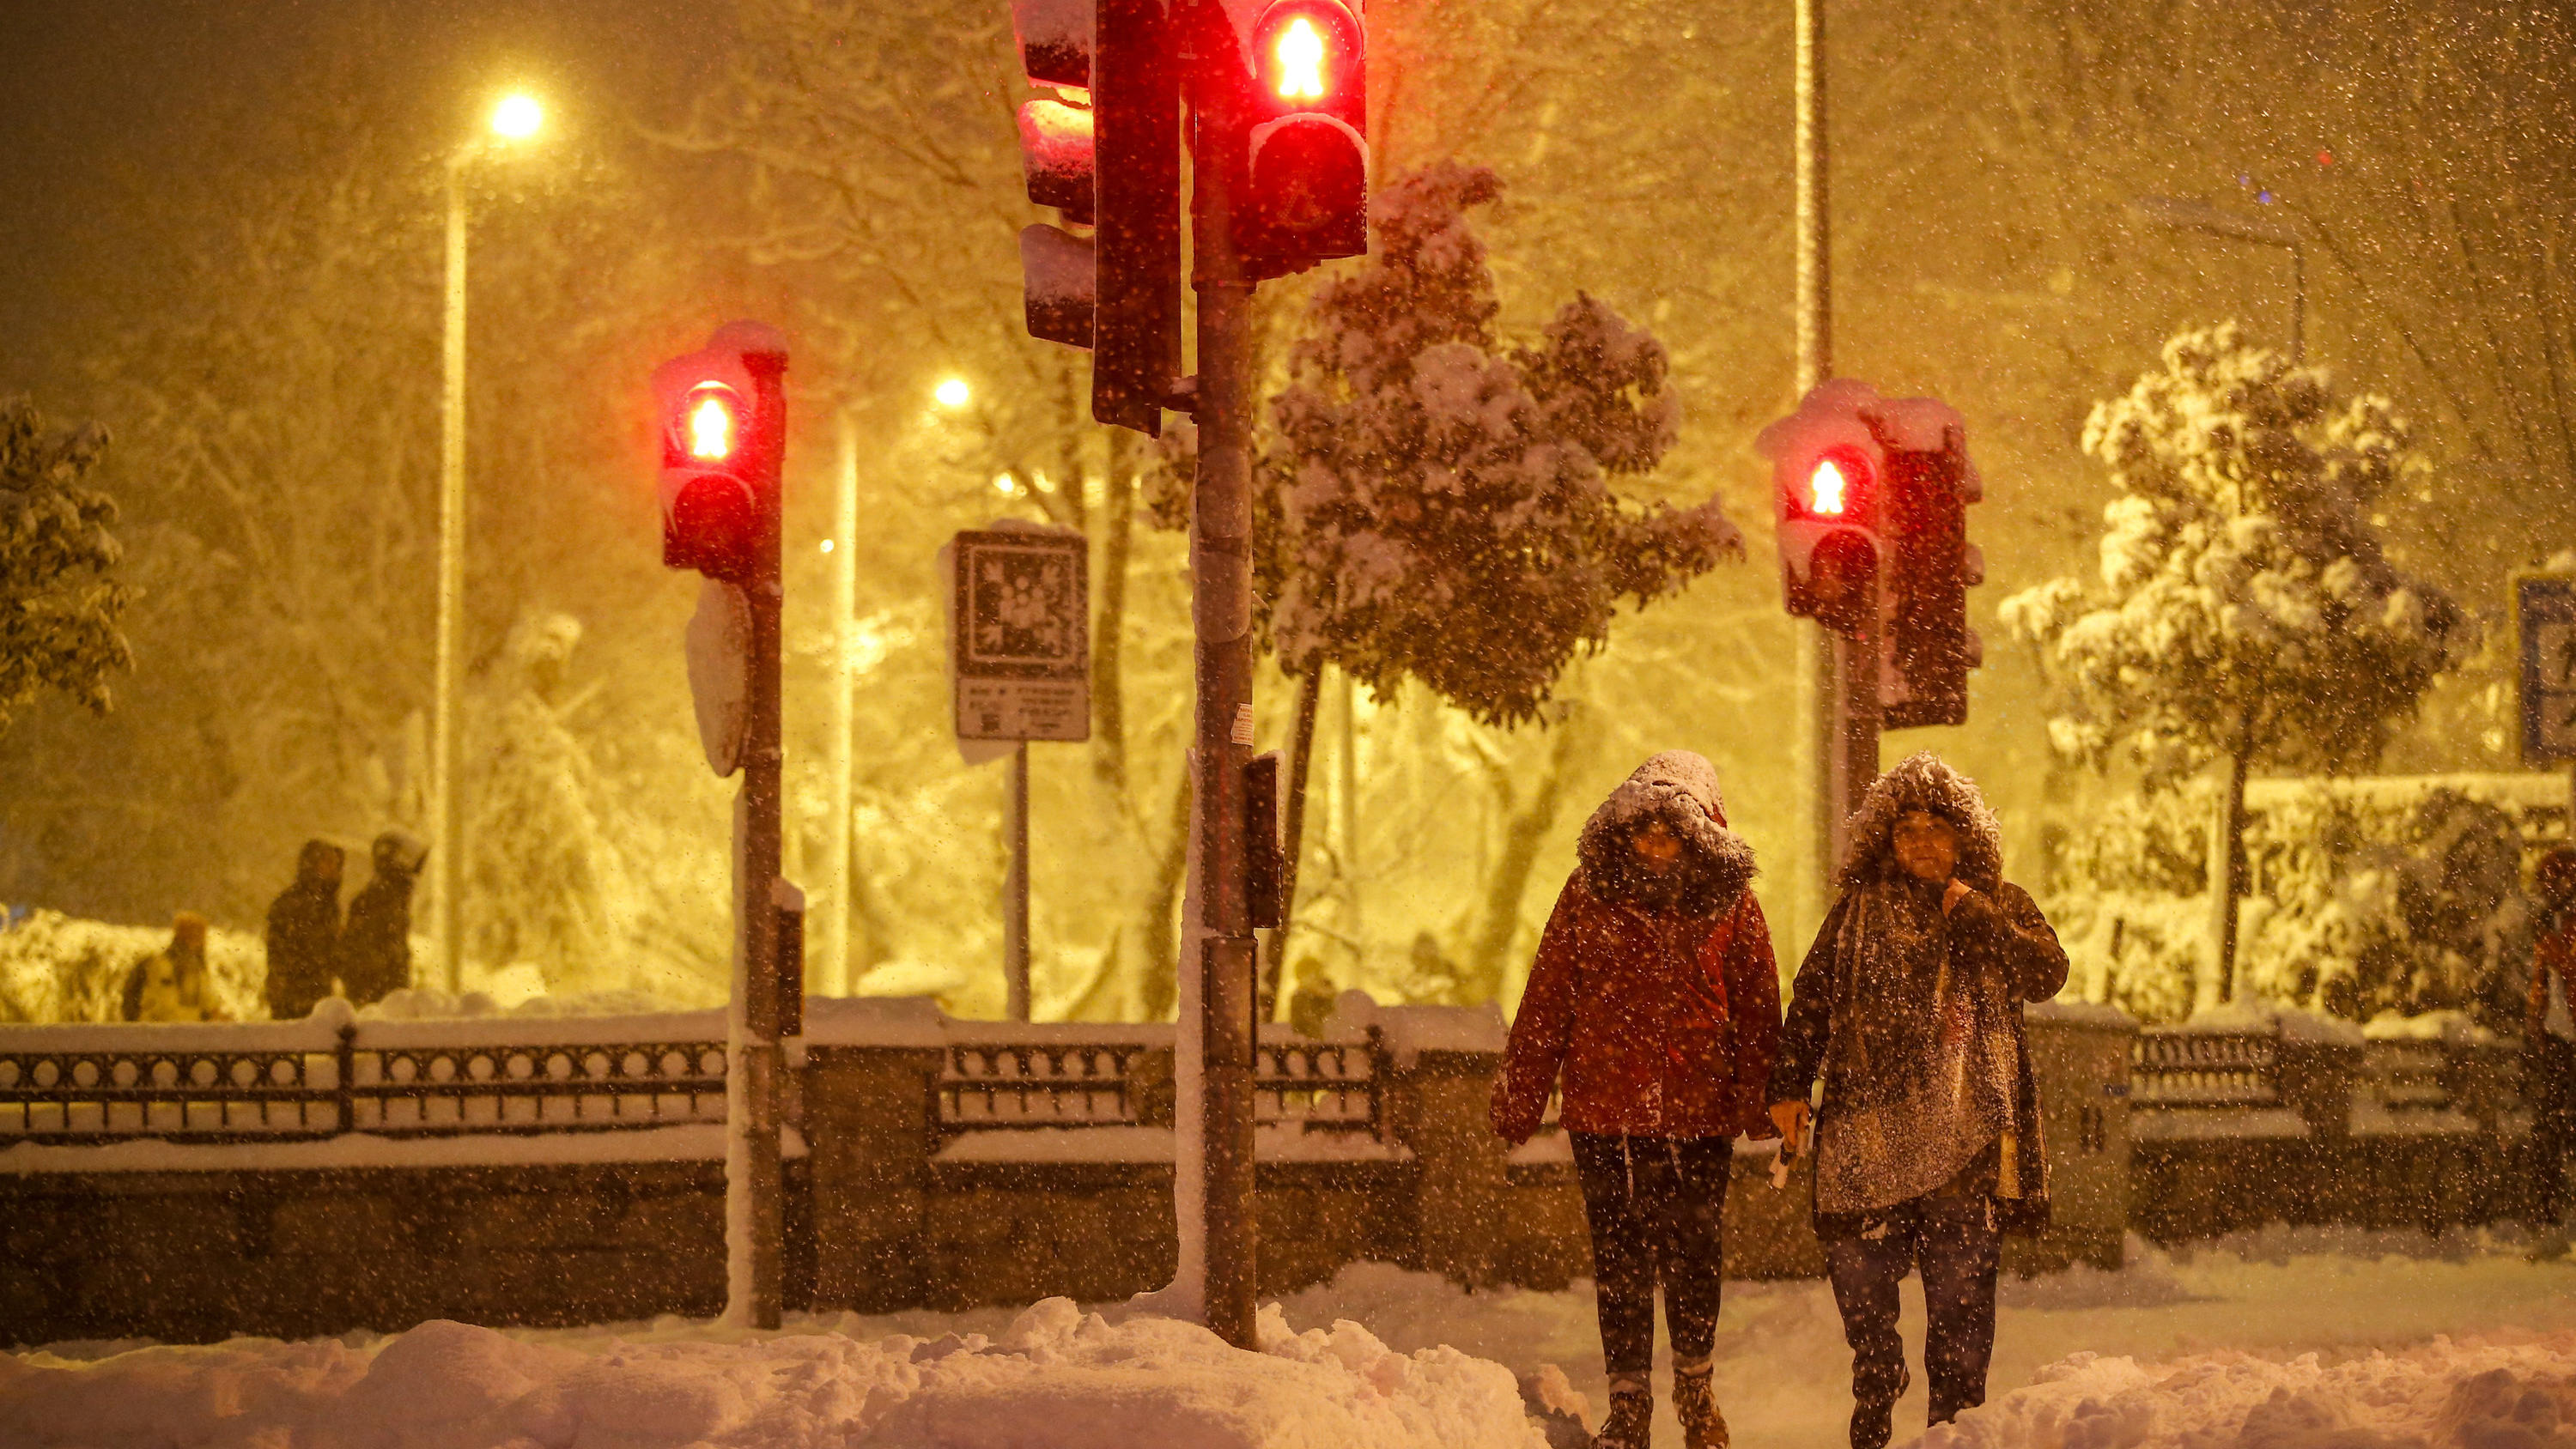 Pedestrians walk during snow fall in Istanbul, Turkey, on Monday, Jan. 24, 2022. A severe snowstorm disrupted road and air traffic Monday in the Greek capital of Athens and in neighboring Turkey's largest city of Istanbul, while snow blanketed most of Turkey and Greece, including several Aegean islands. (AP Photo/Emrah Gurel)